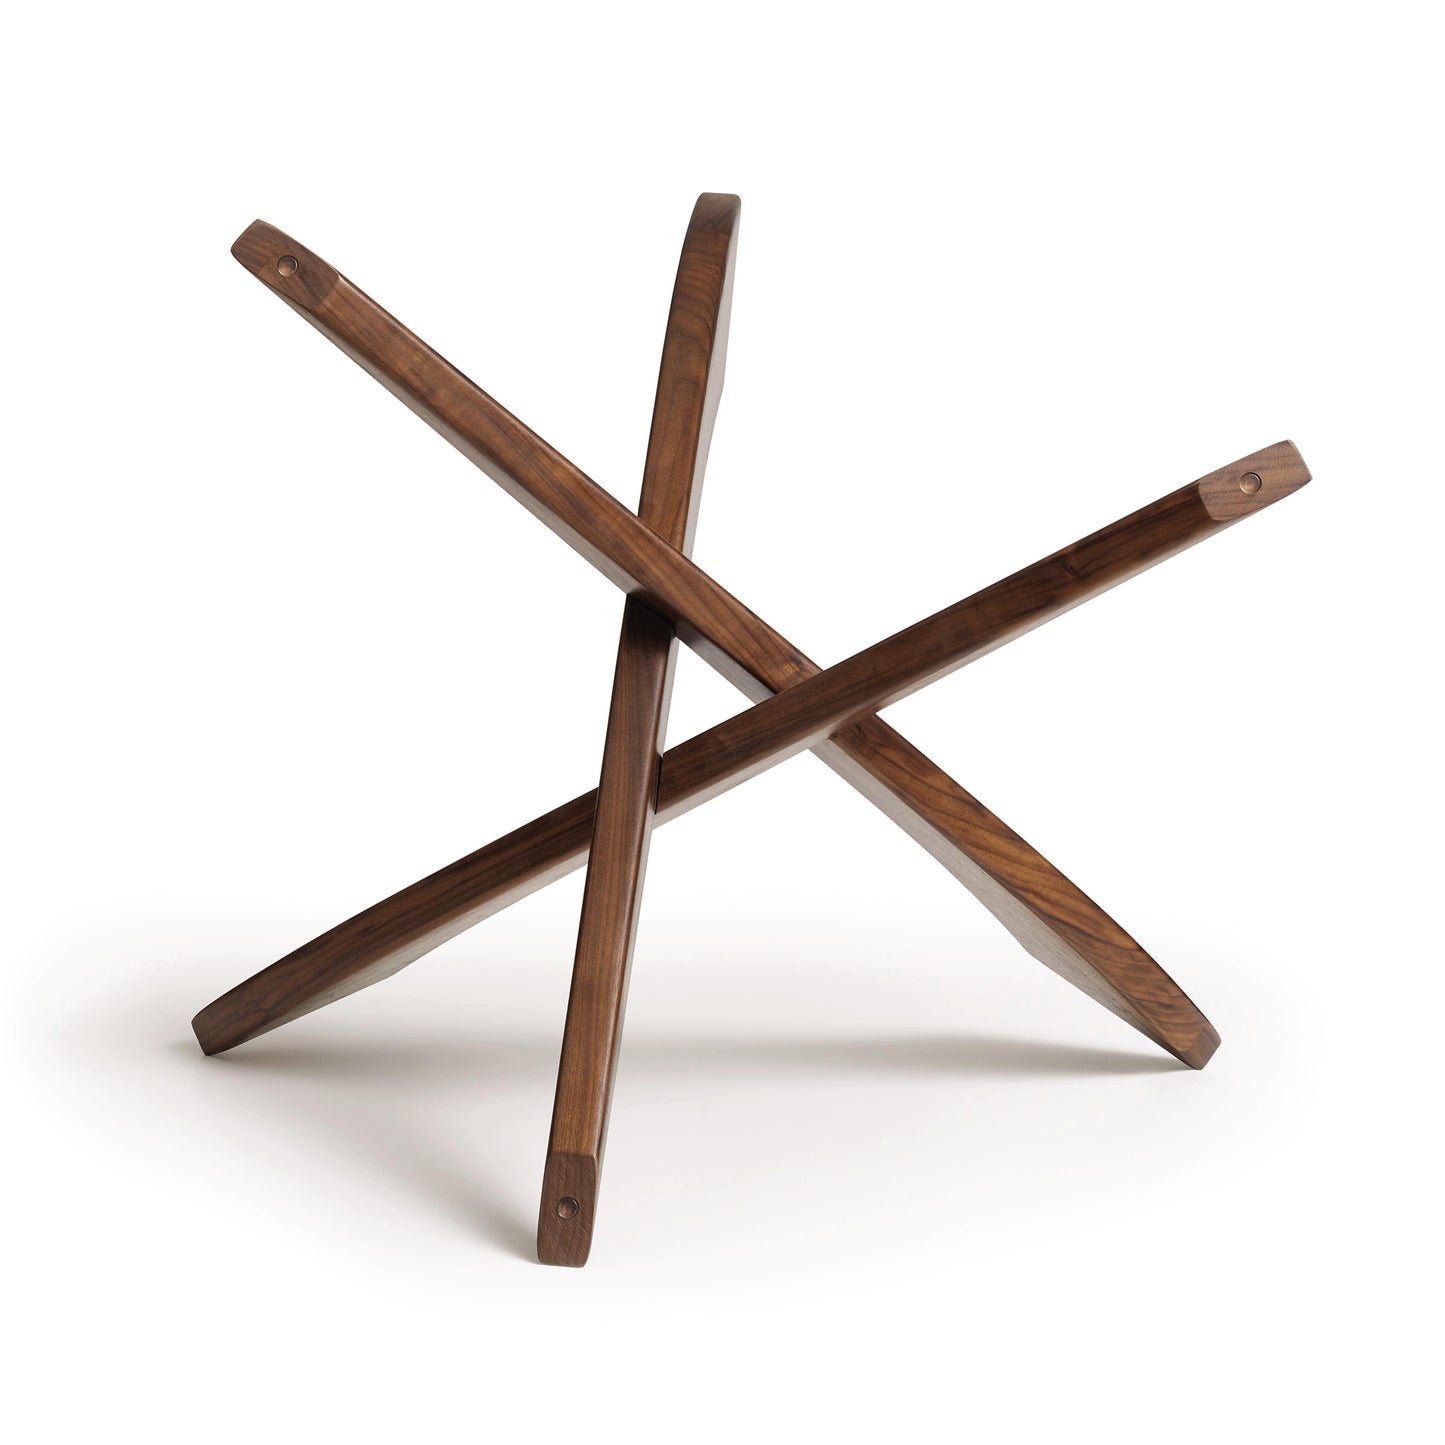 A Entwine Round Coffee Table, part of the Copeland Furniture Collection, collapsed and viewed from a side angle, isolated on a white background.